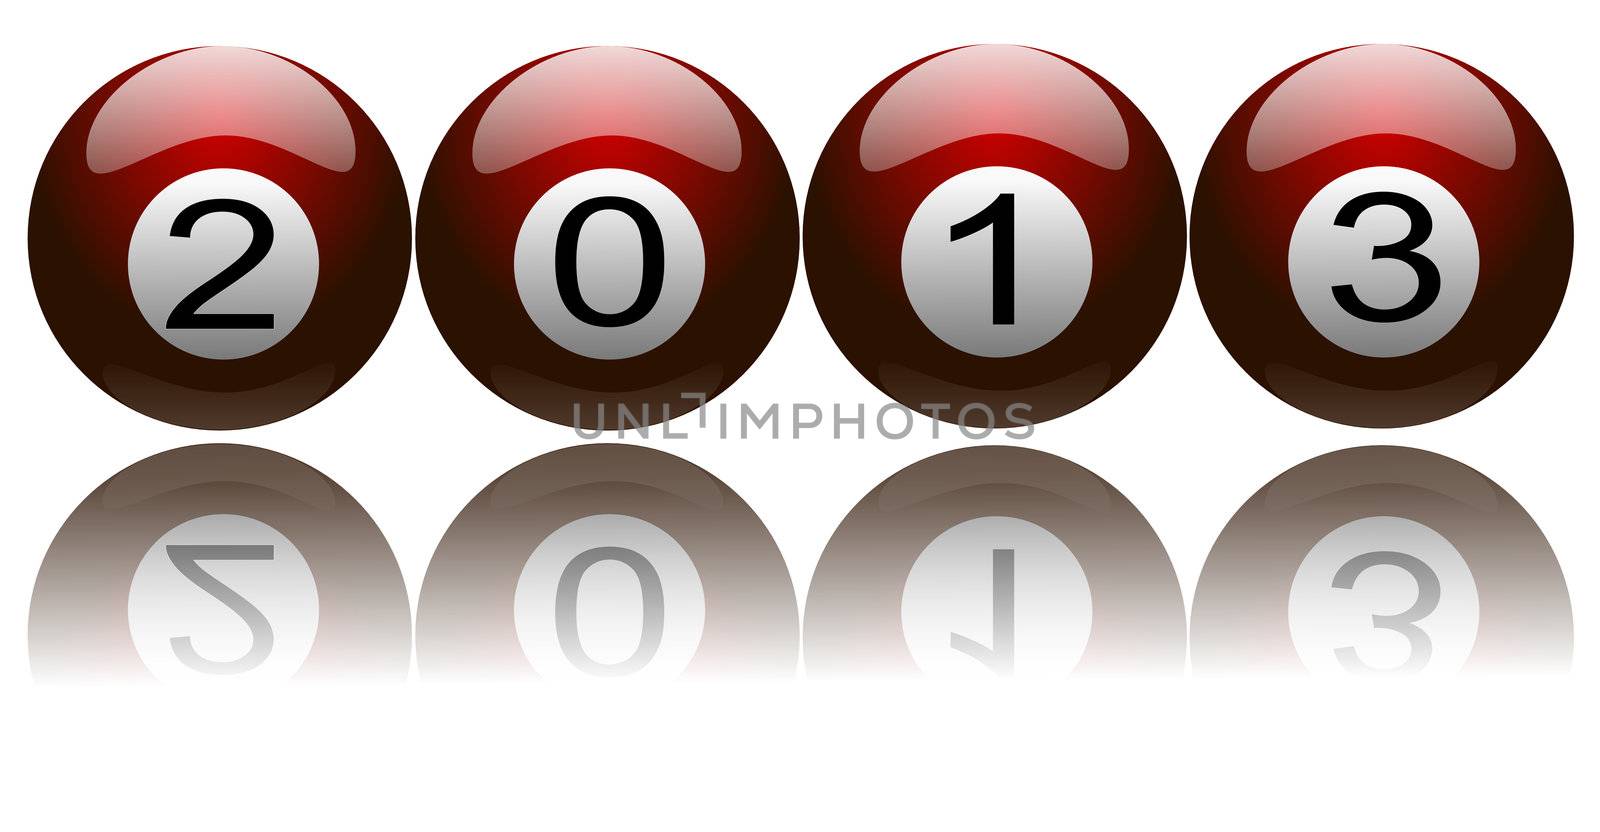 Illustration of New Year 2013 with digits on pool balls